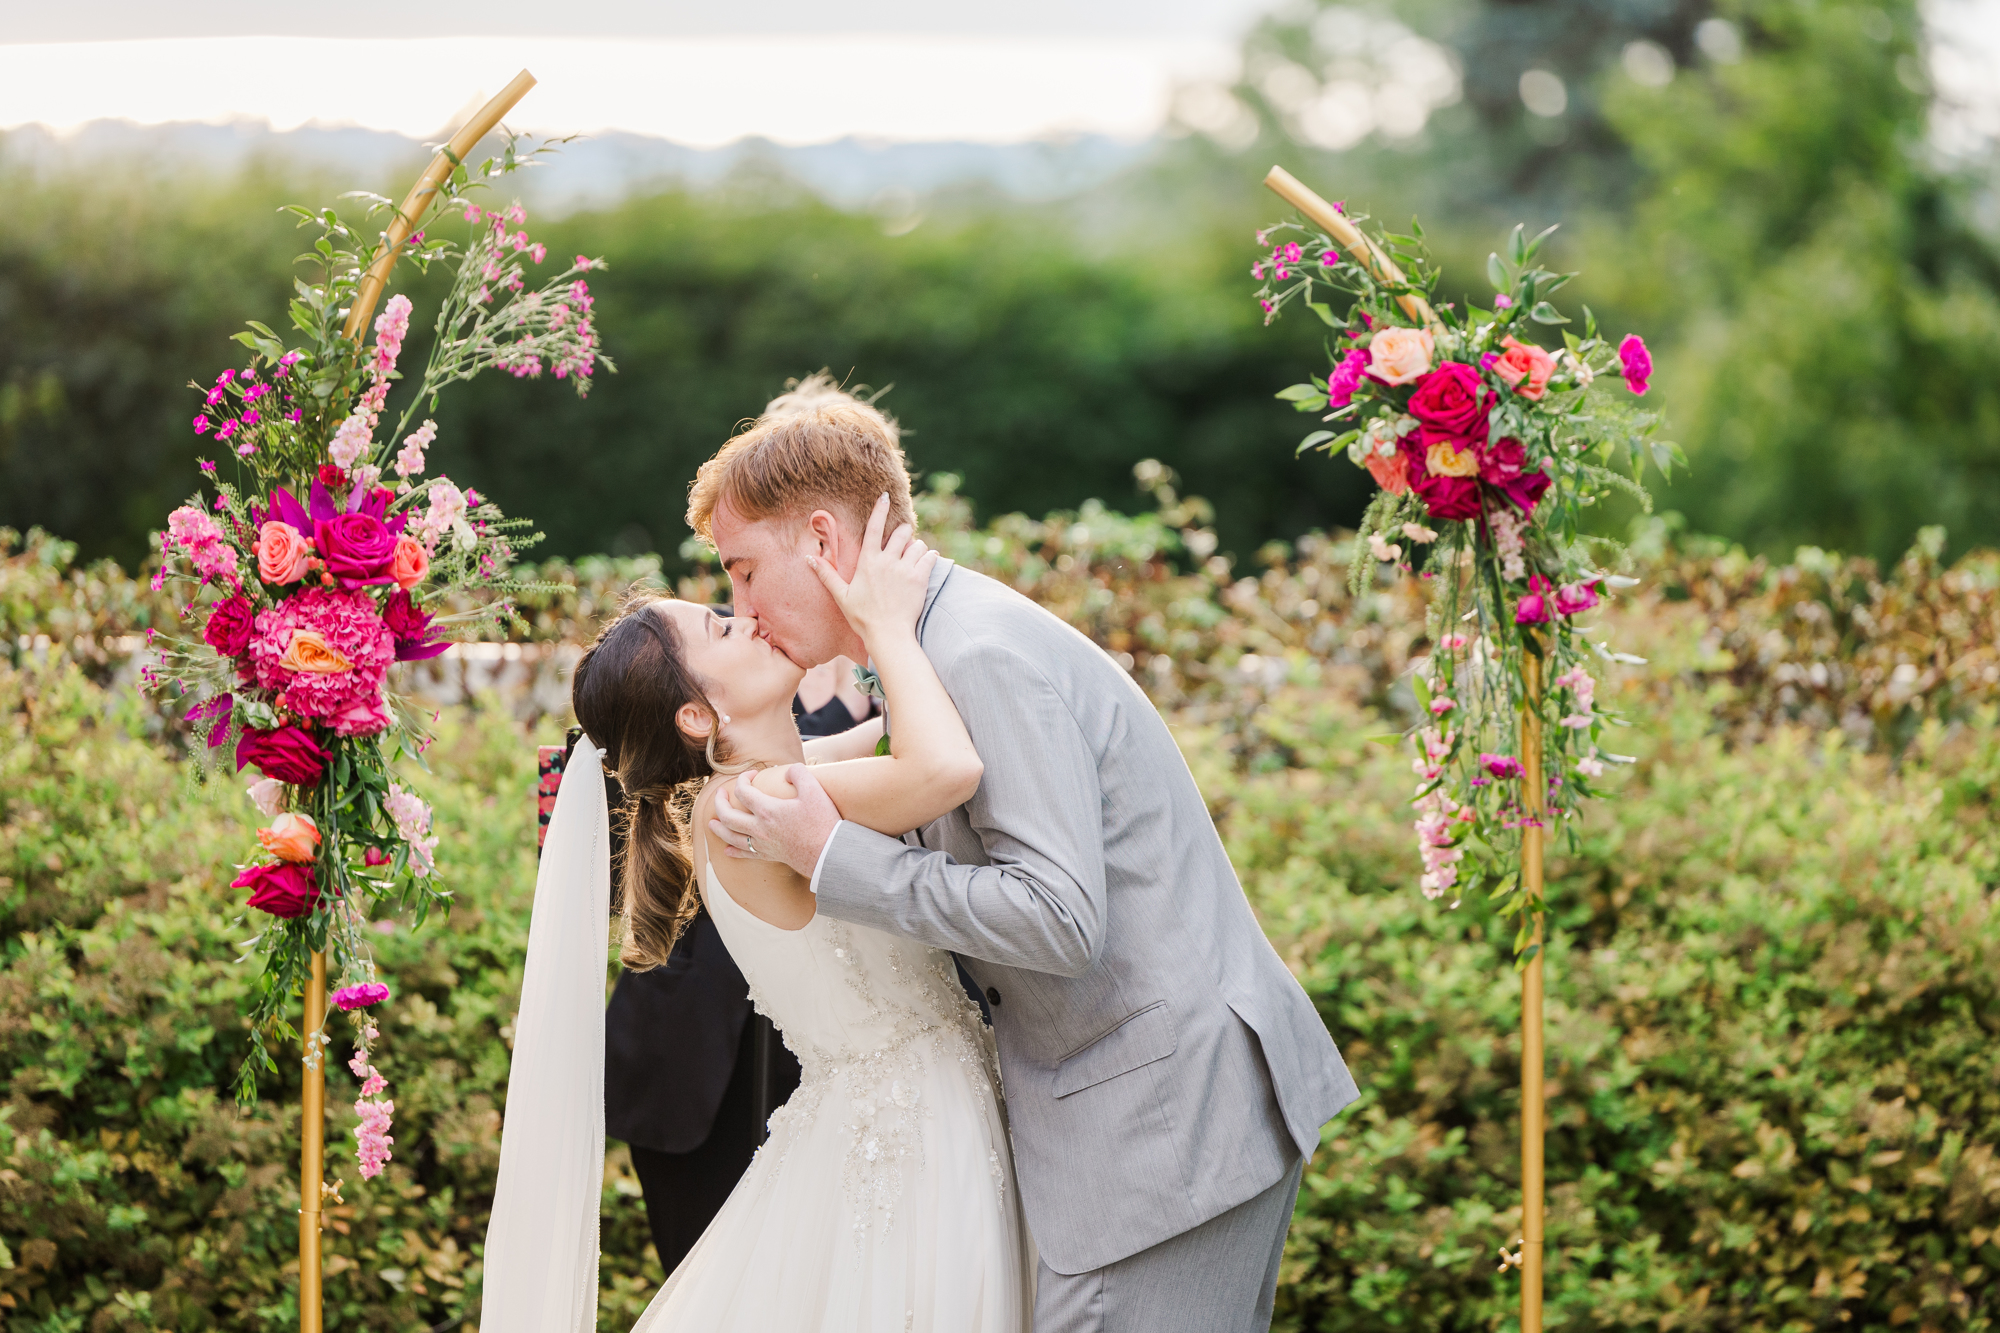 Fabulous Wedding at Briarcliff Manor in Summertime